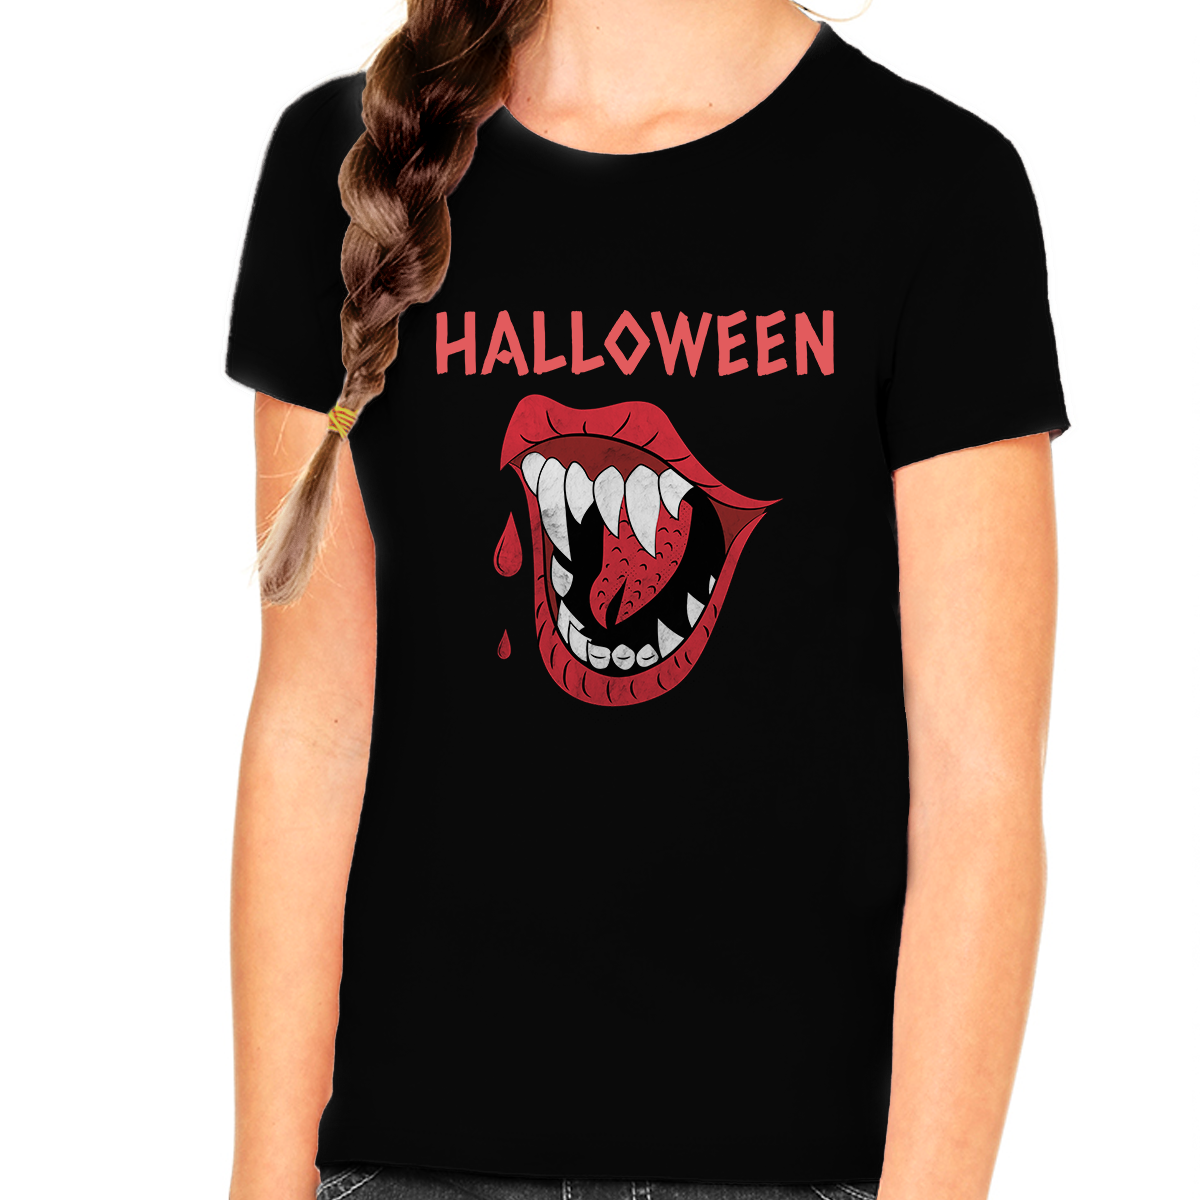 Halloween Smile Funny Halloween T Shirts for Girls Scary Halloween Tshirts Girls Halloween Shirts for Kids